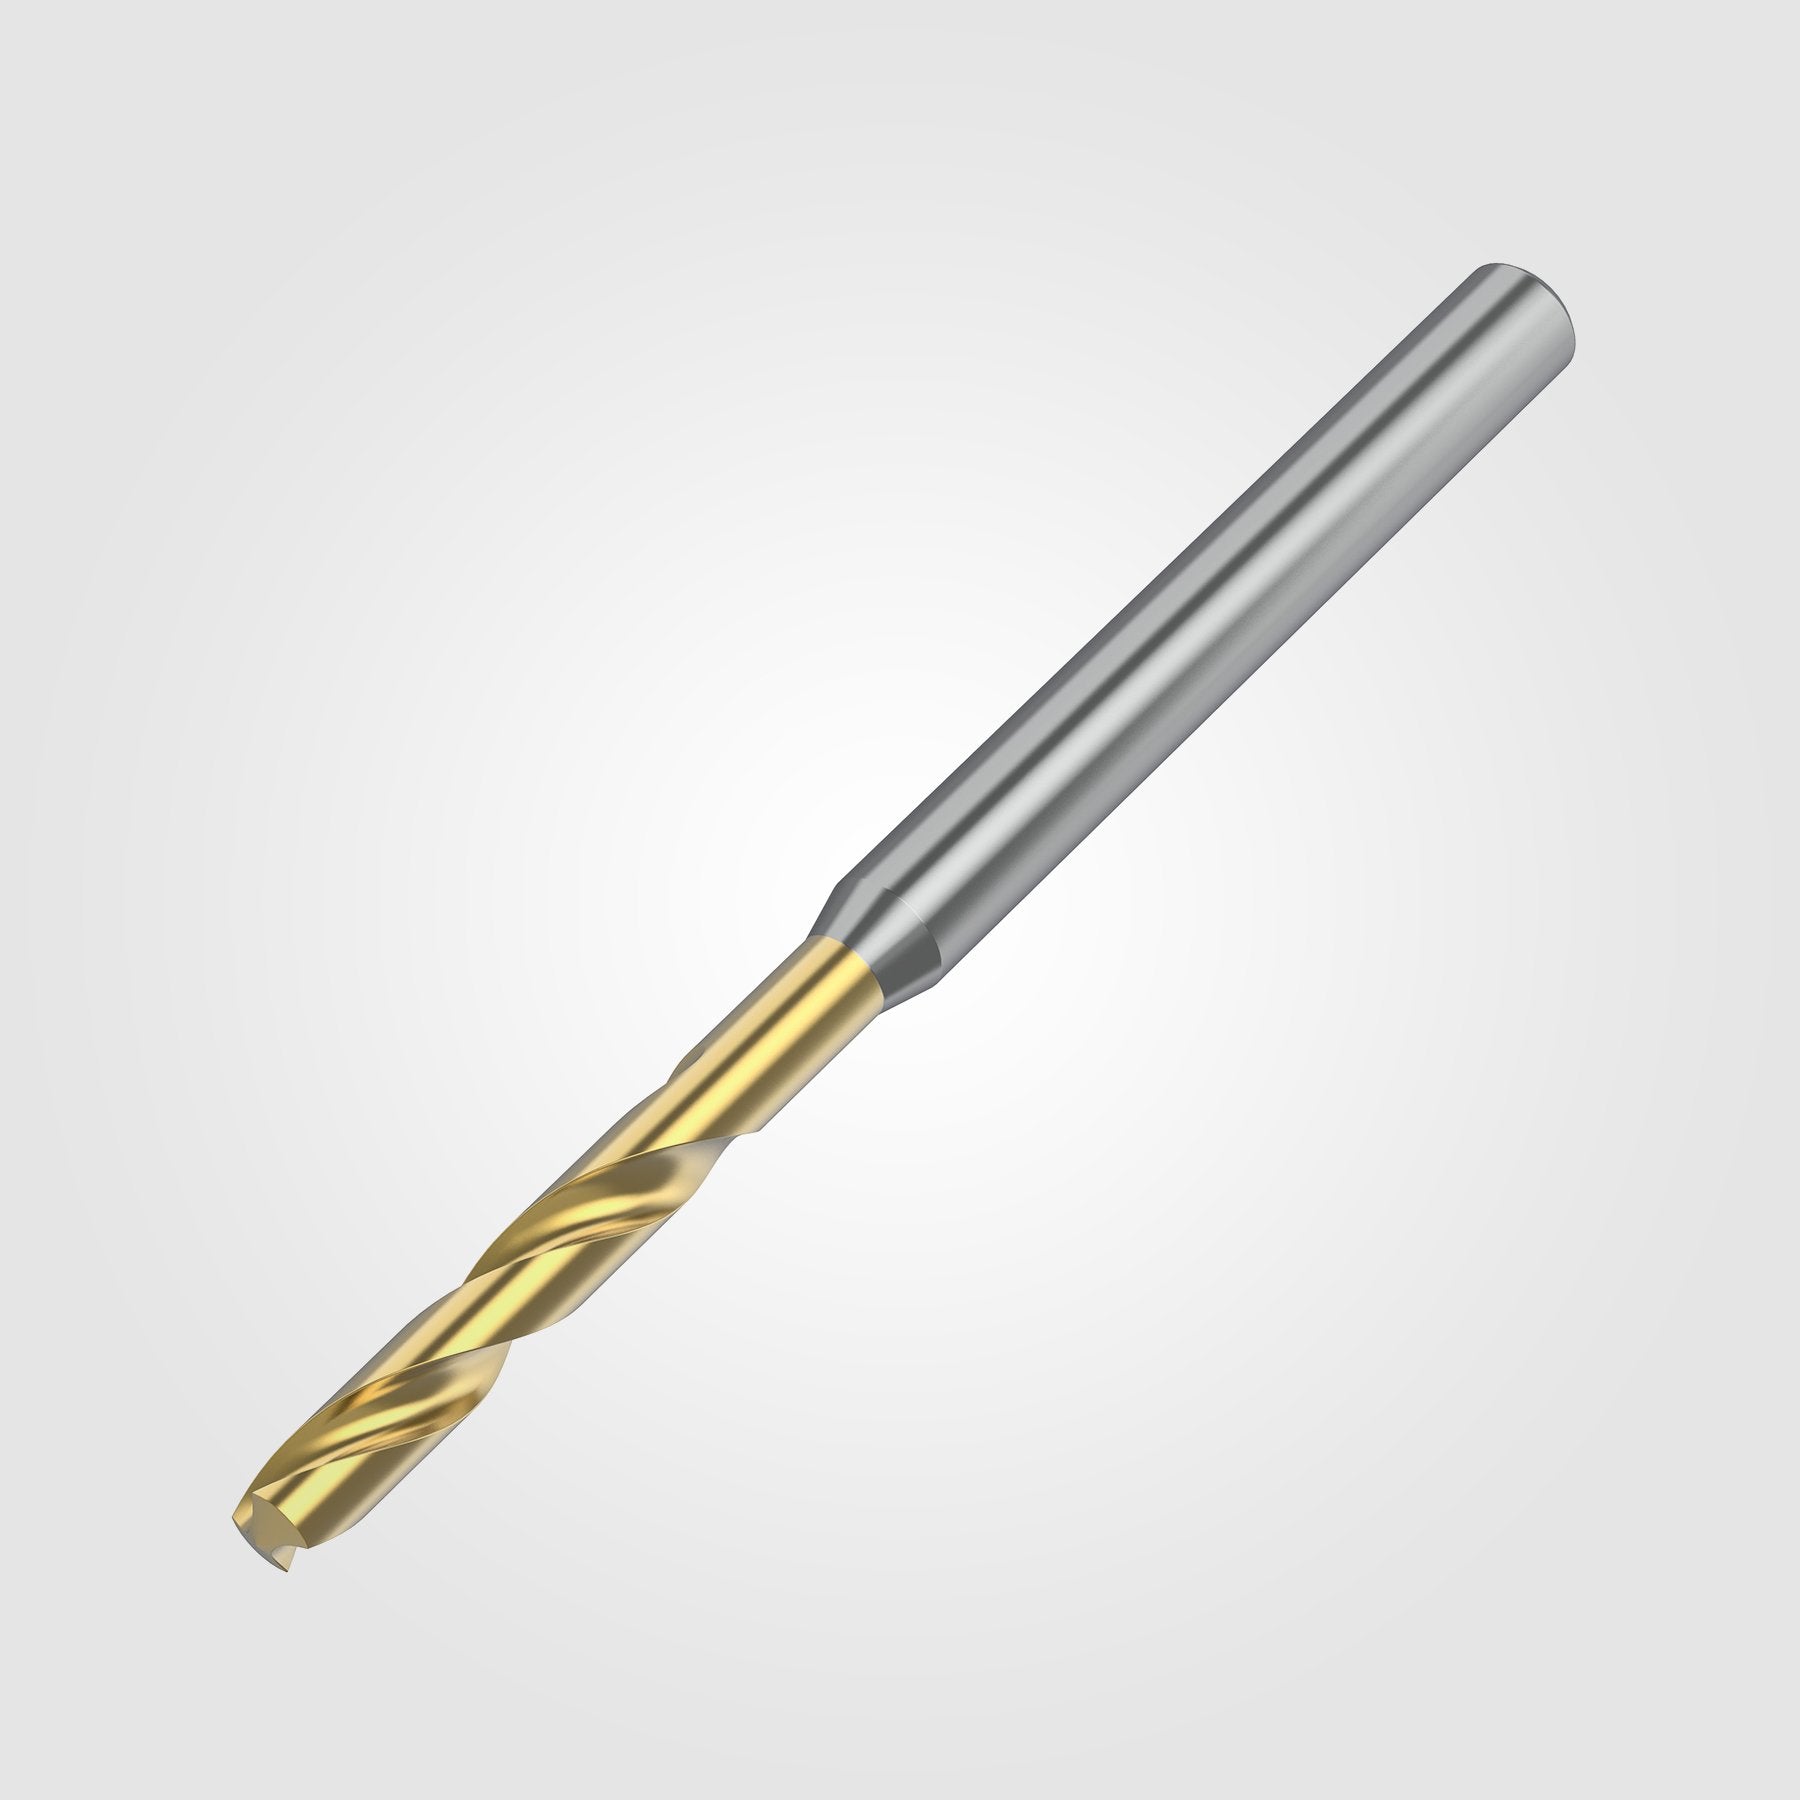 GOdrill (THROUGH COOLANT) | 16.271mm / .6406" / 3xD | SOLID CARBIDE DRILL | 4151279